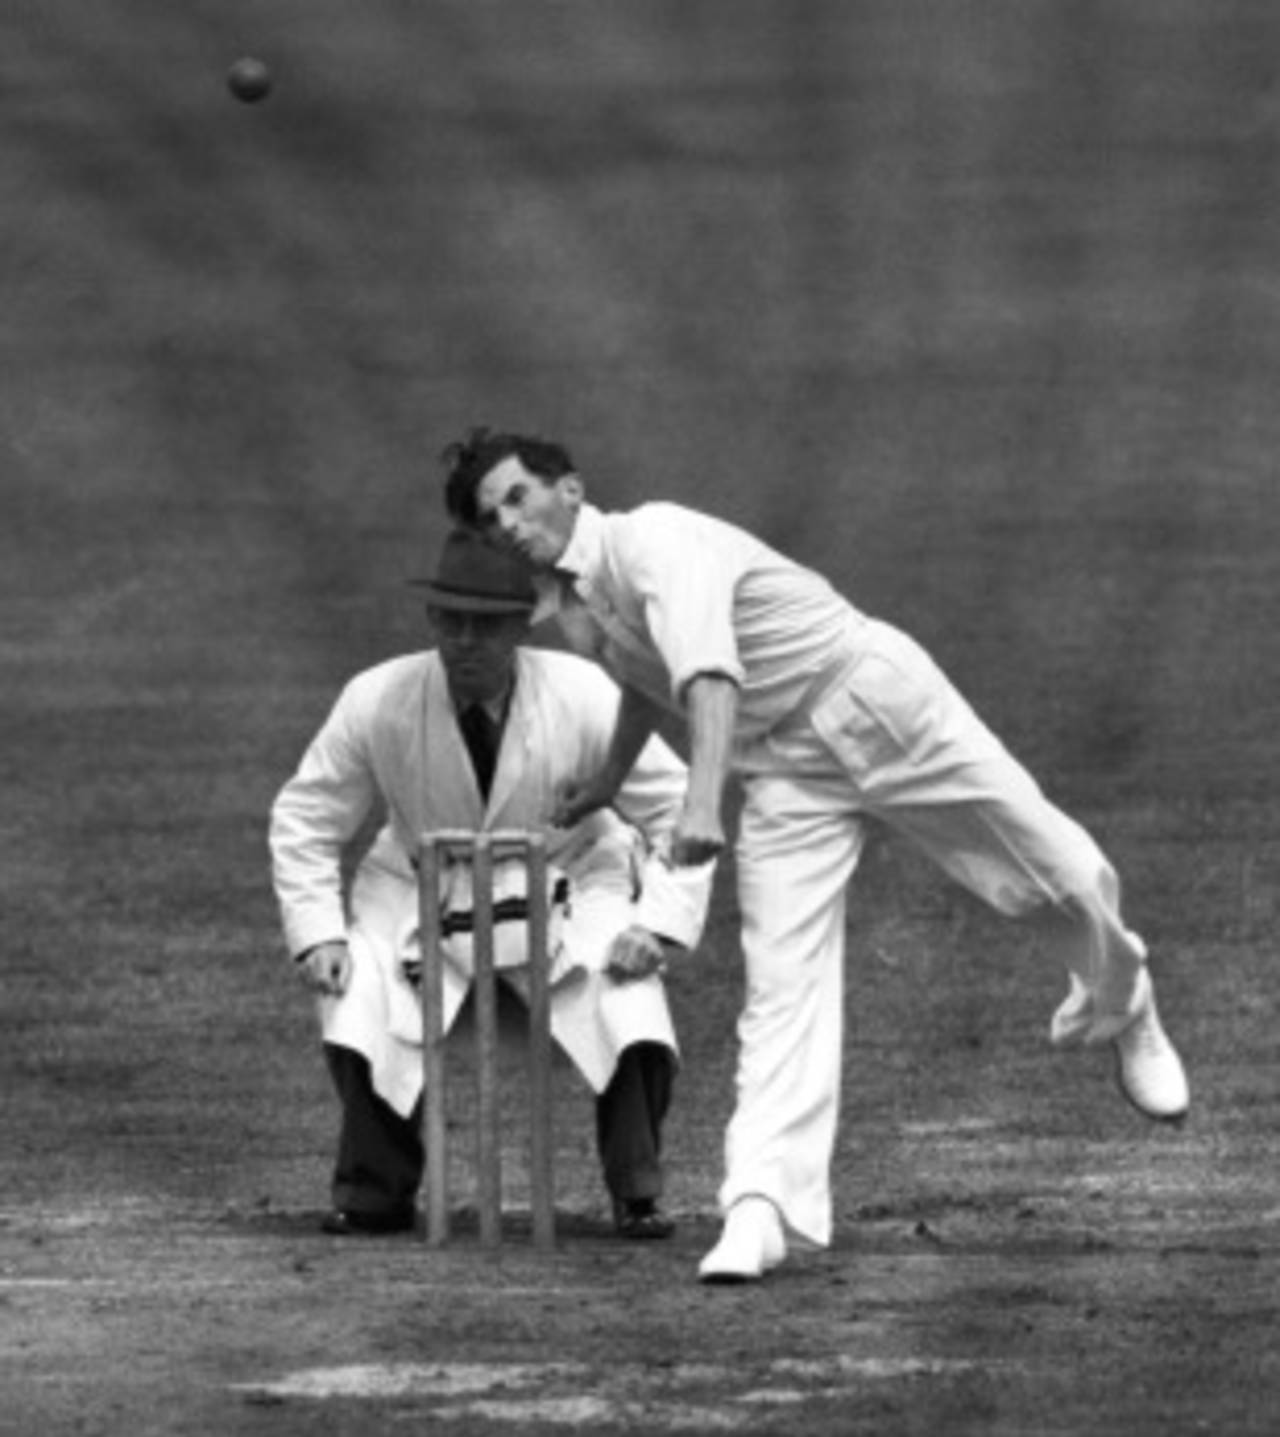 Vince Broderick bowling in the Test Trial, England XI v The Rest, Edgbaston, June 2, 1948